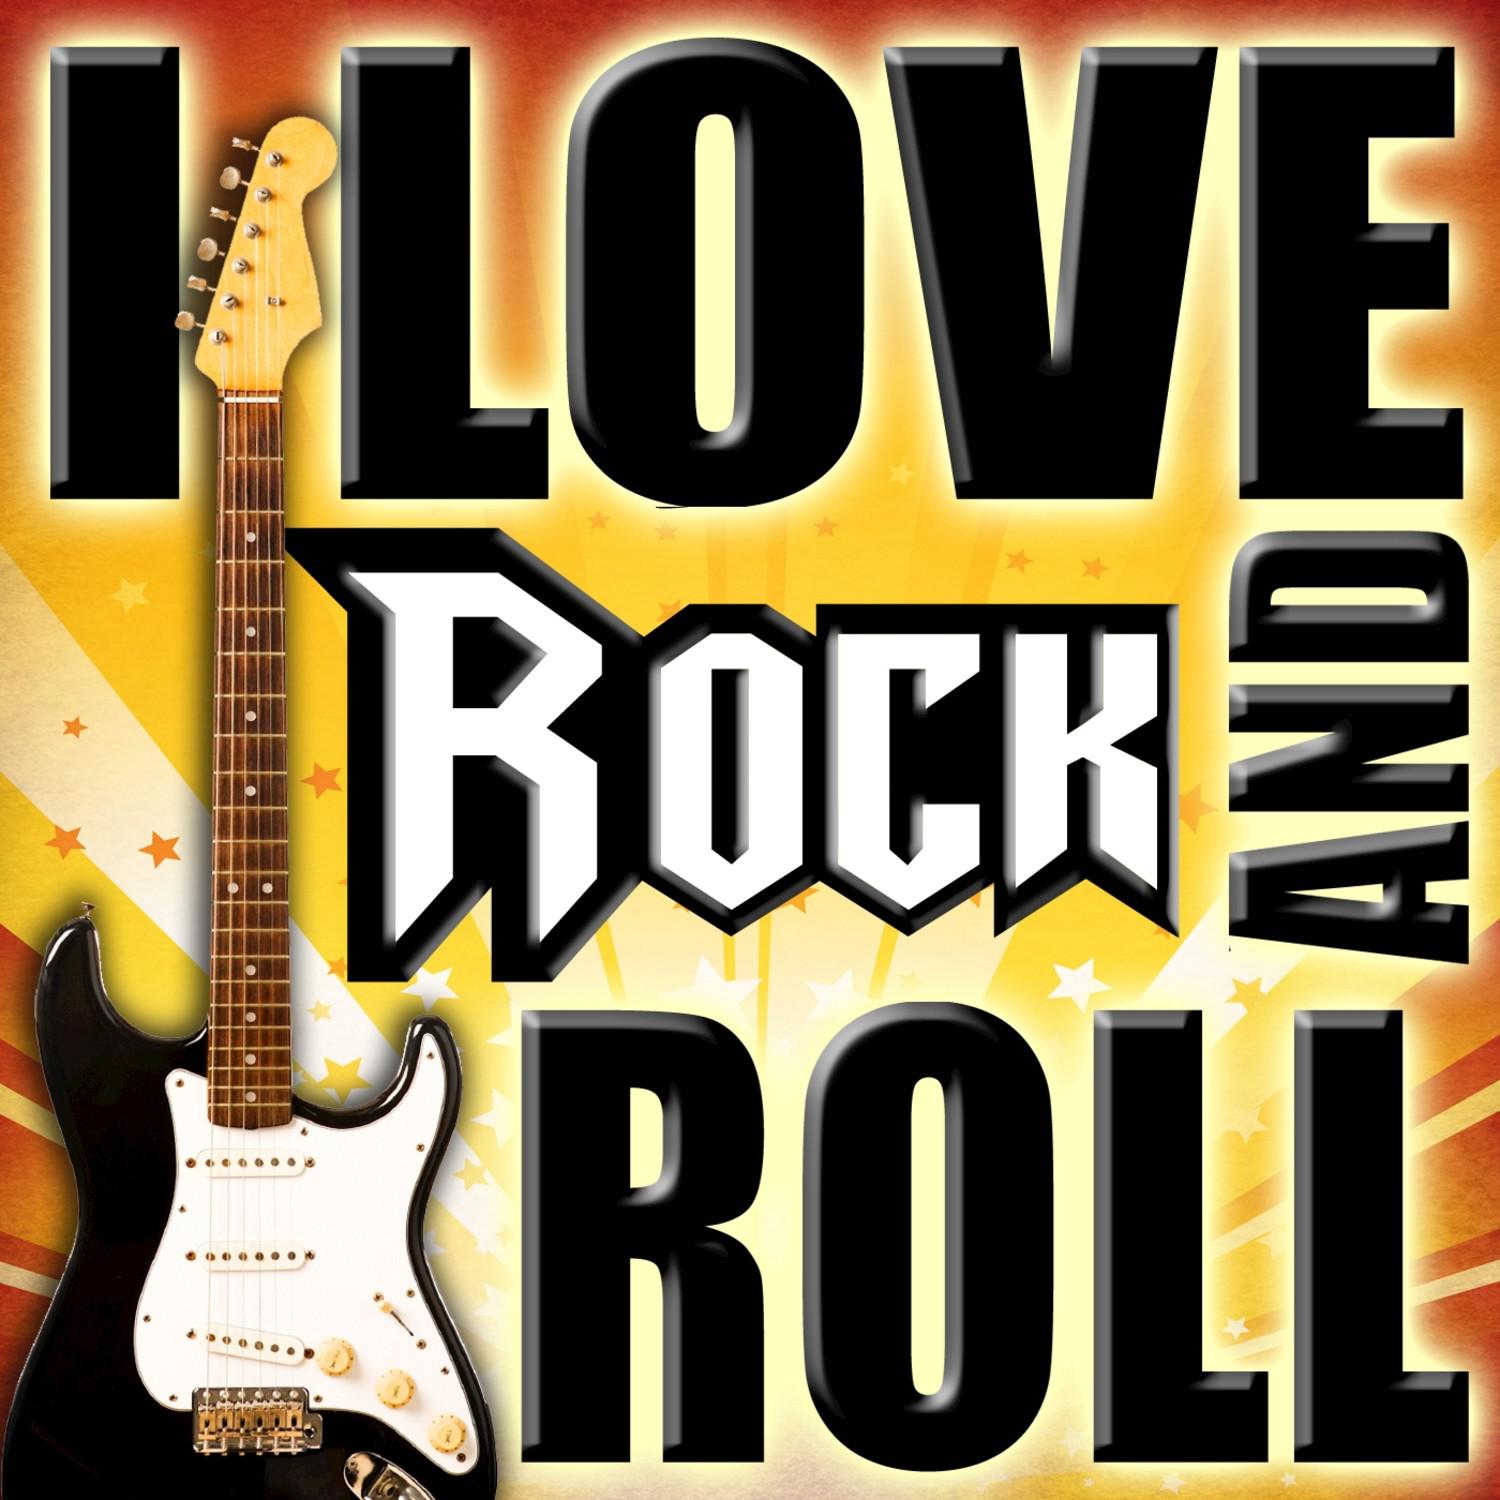 I Love Rock and Roll